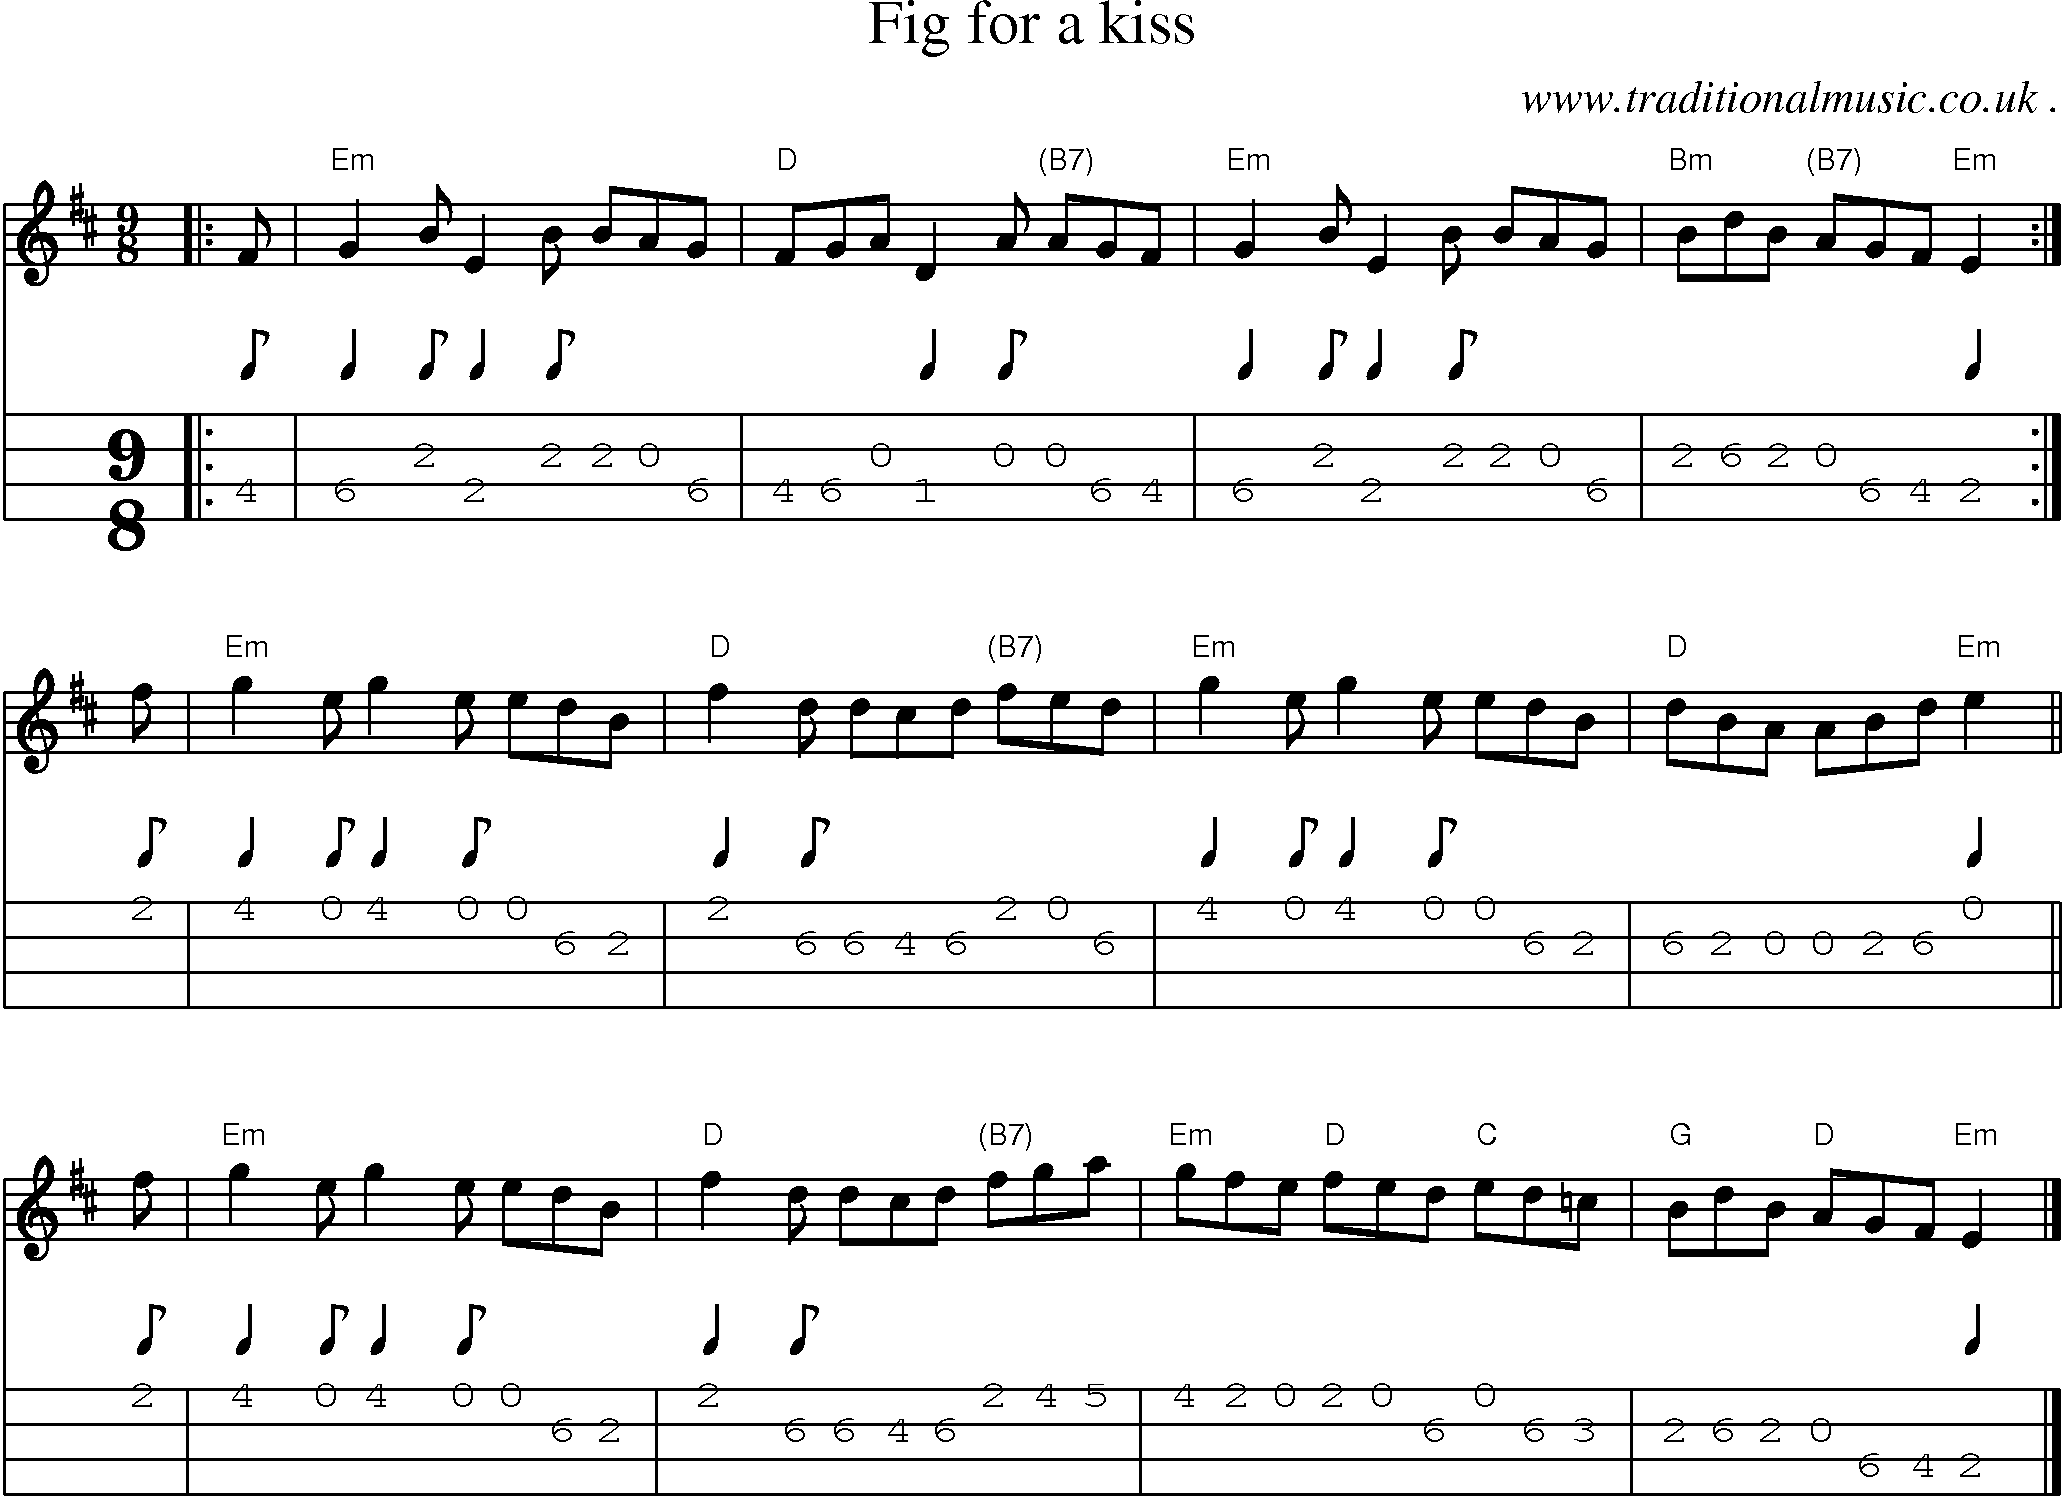 Sheet-music  score, Chords and Mandolin Tabs for Fig For A Kiss